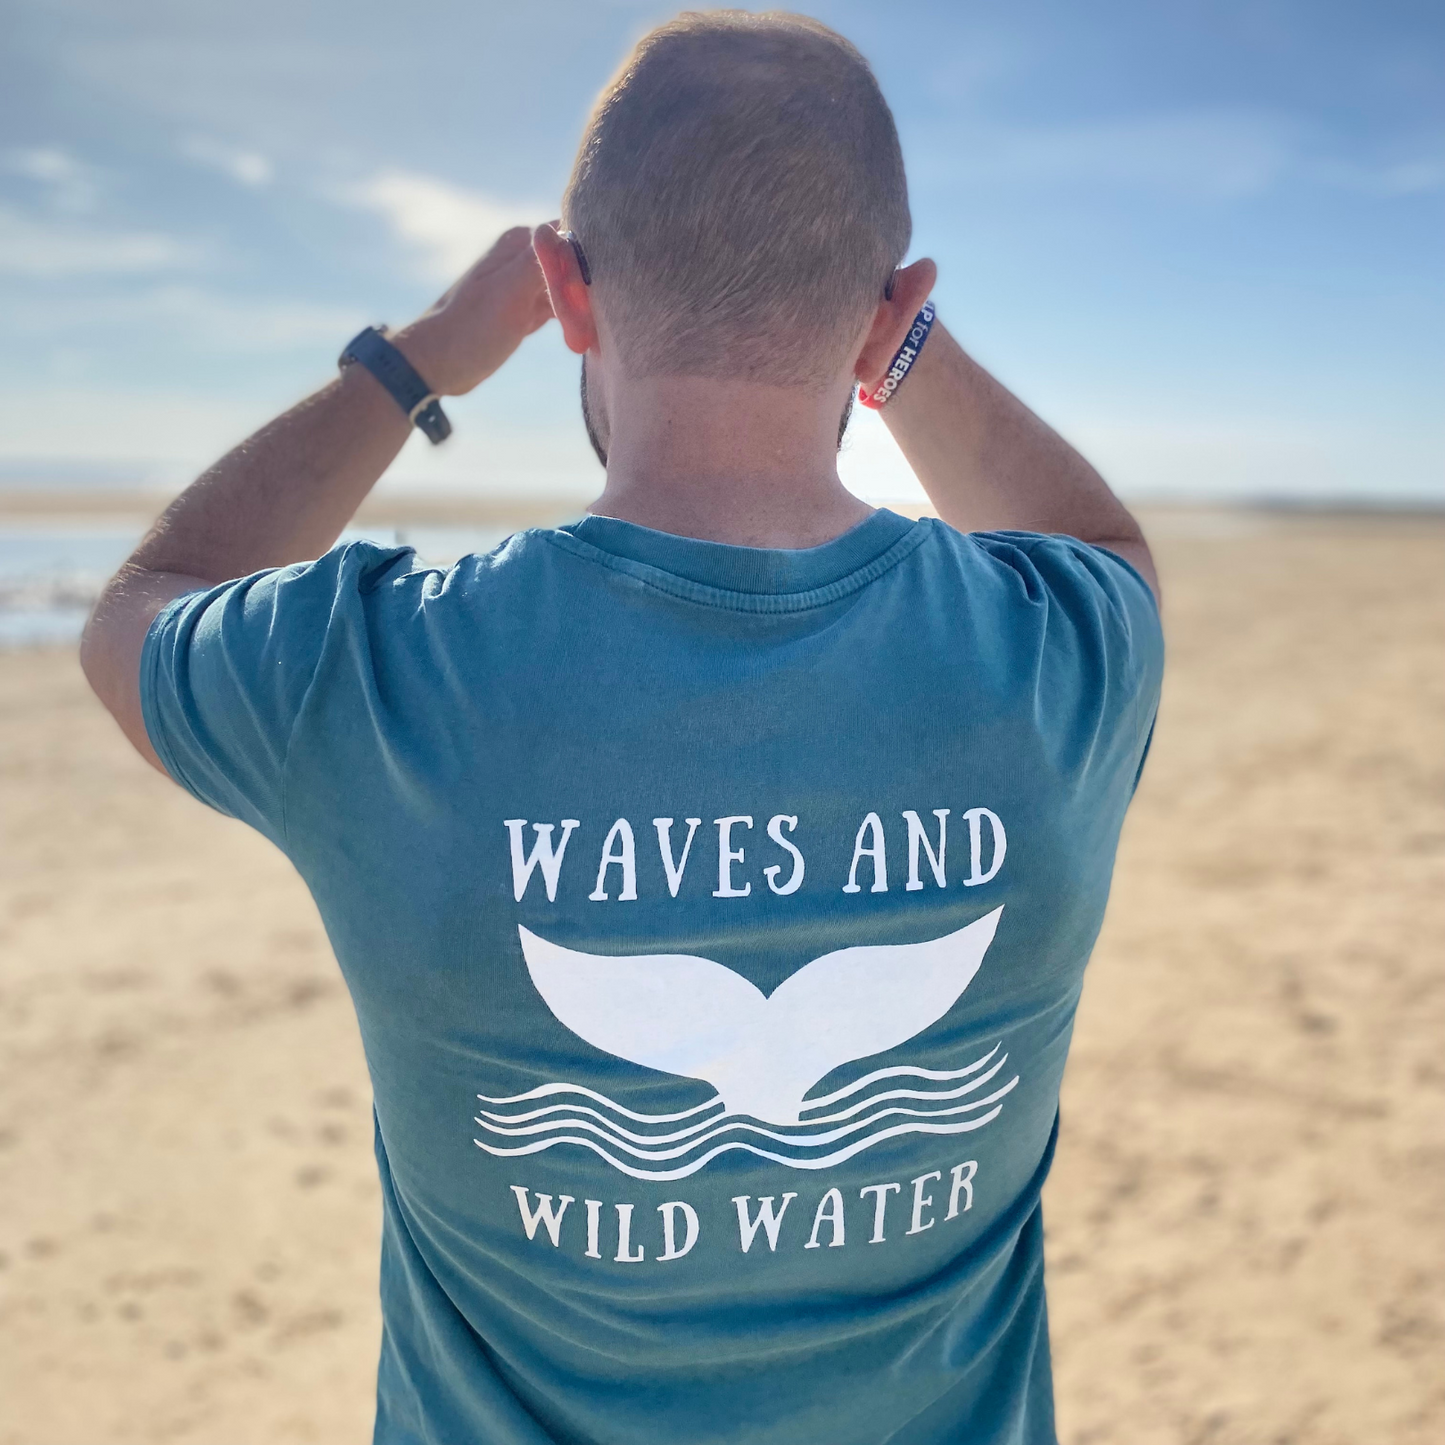 The back of a man stood on a beach, wearing a green Waves & Wild Water t-shirt.